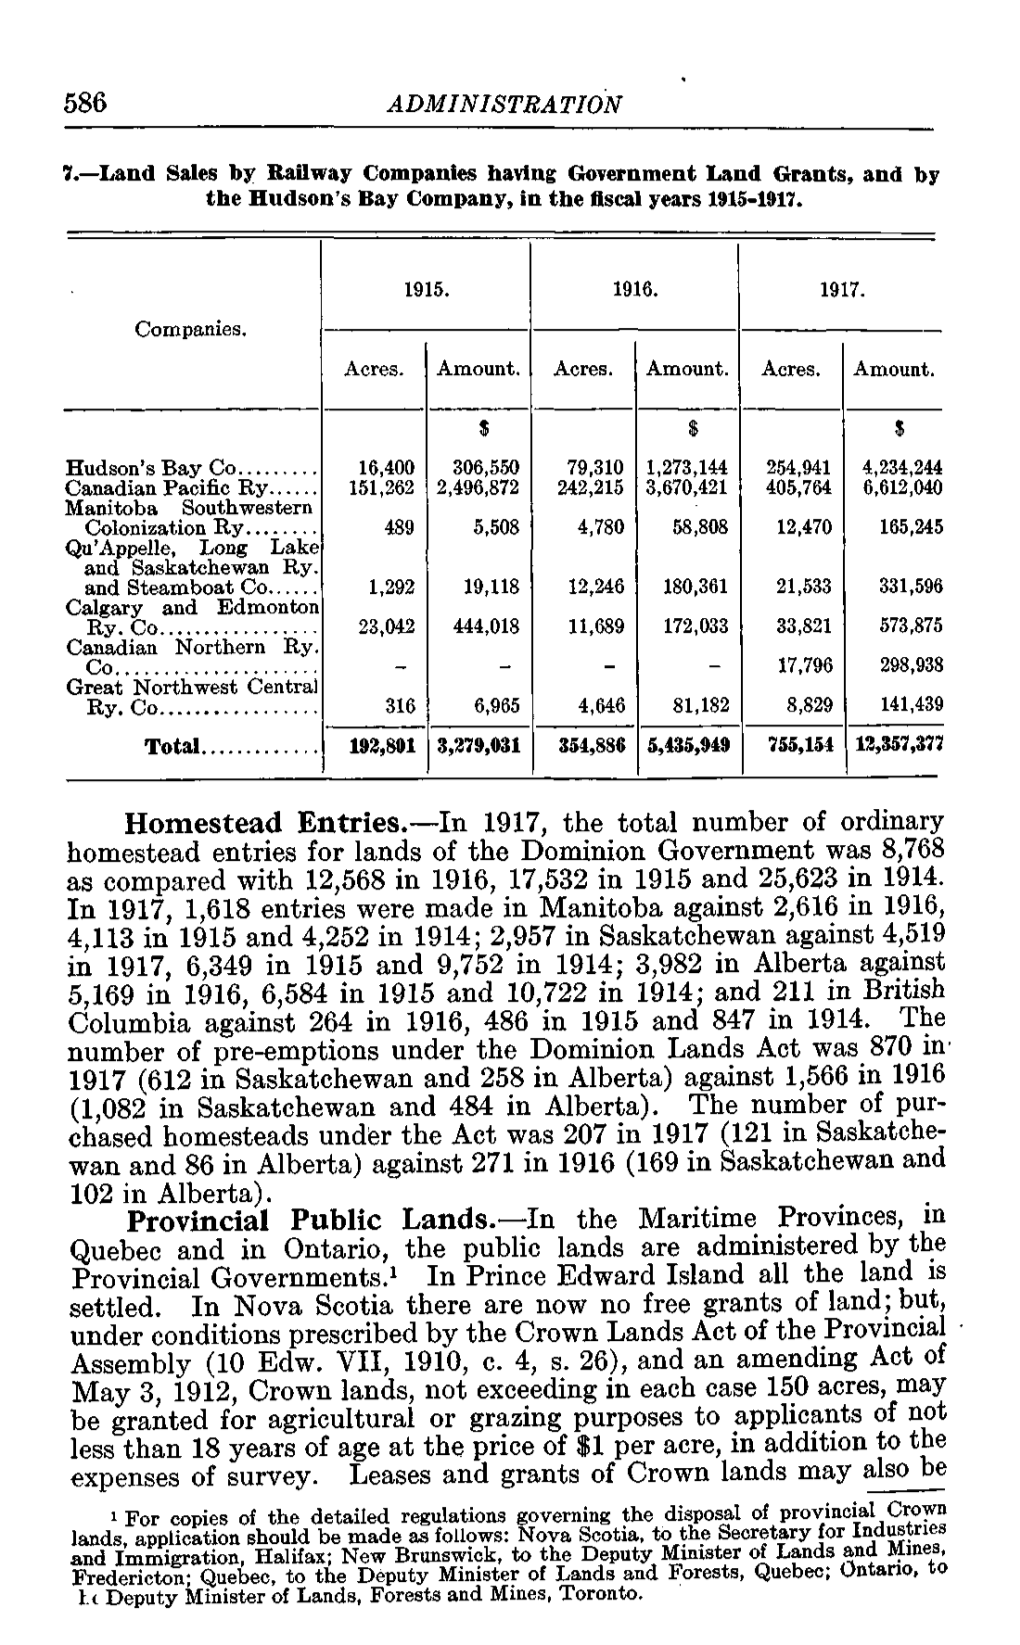 586 Homestead Entries.—In 1917, the Total Number of Ordinary